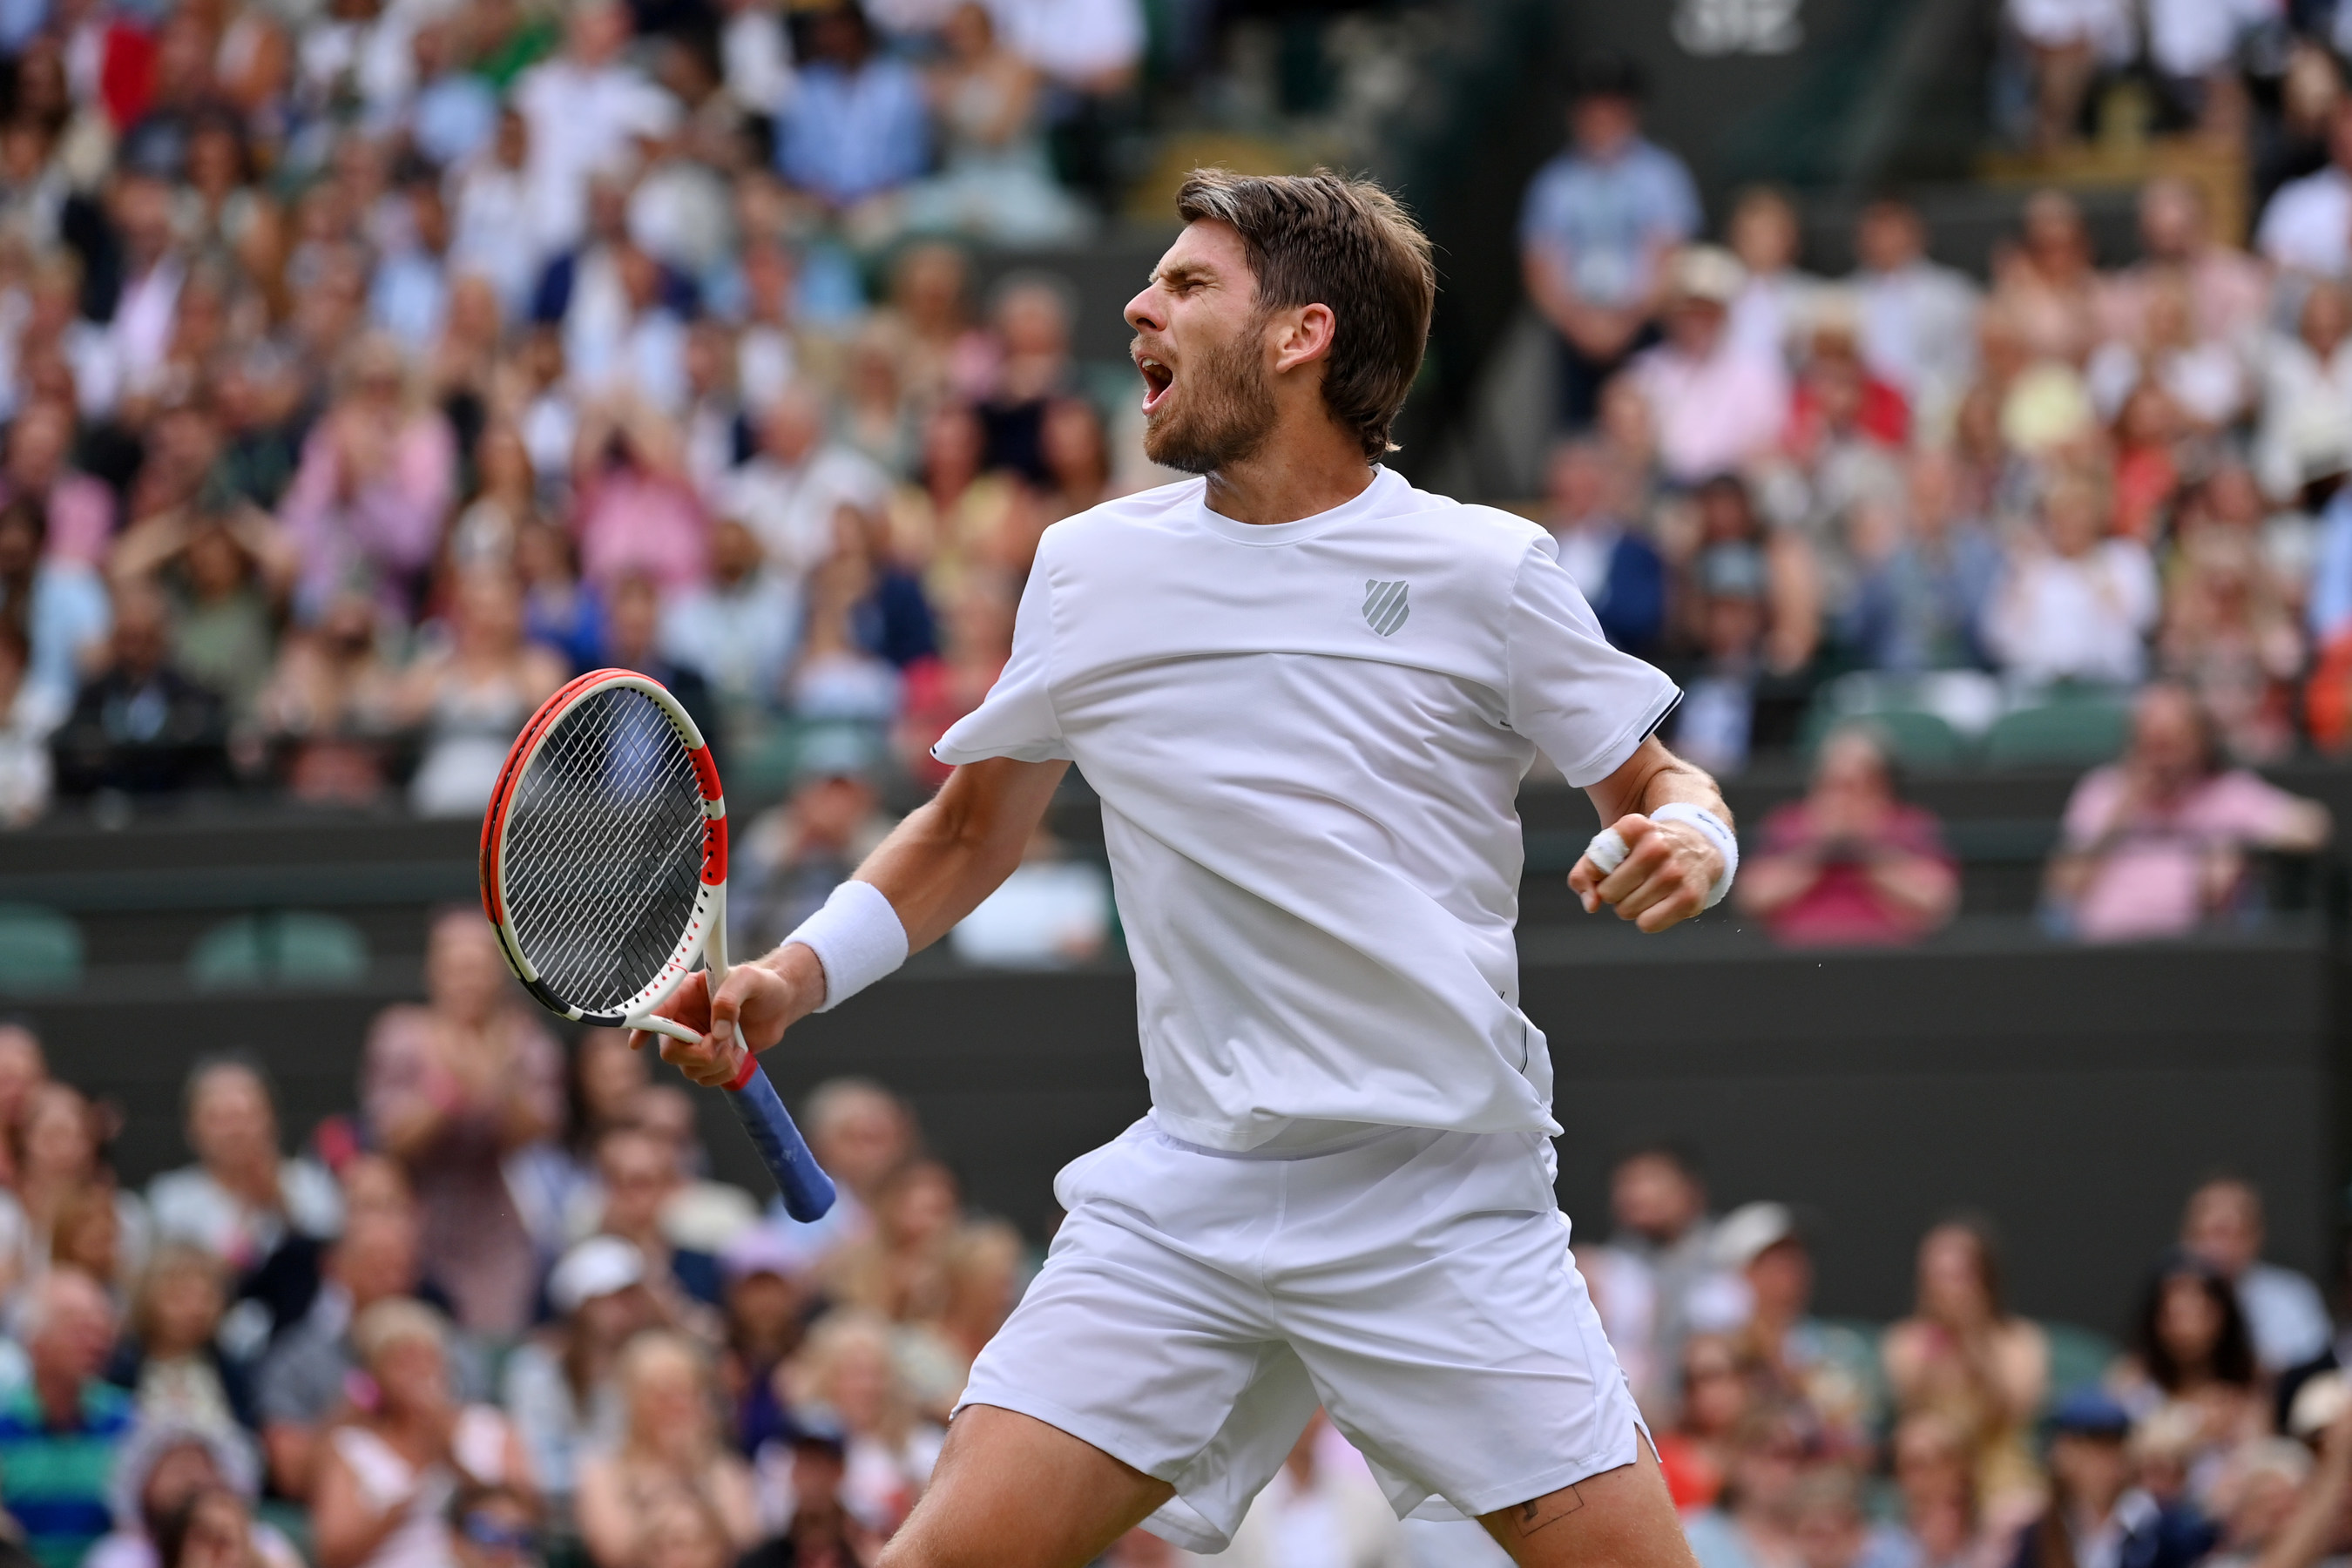 K Swiss Athlete Cameron Norrie Beats David Goffin To Advance To The Semi Finals At Wimbledon Pr Newswire Apac